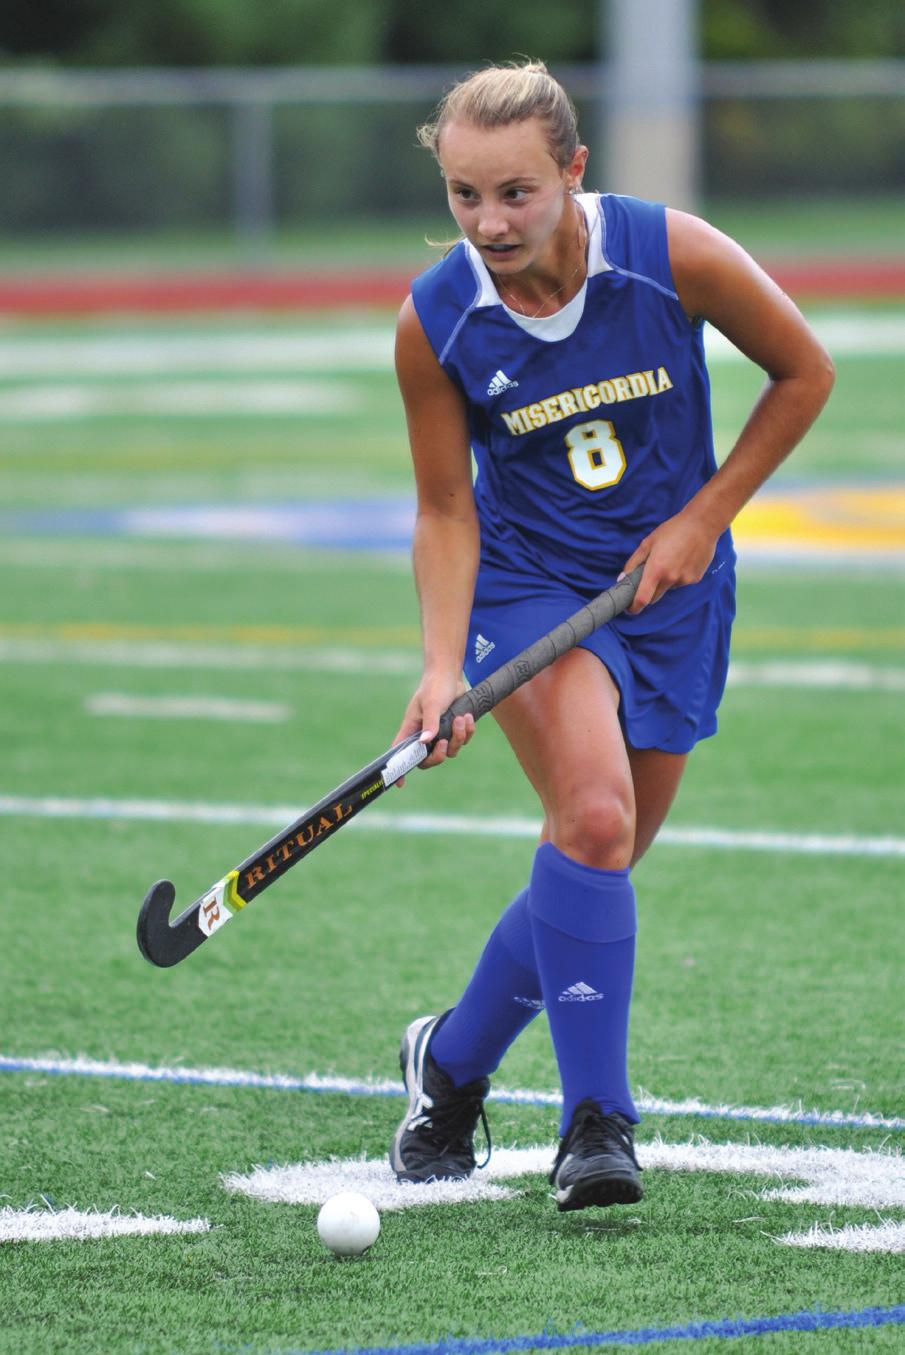 WON THEIR FIRST MAC FREEDOM TITLE IN 2015 The oldest sport at Misericordia, the field hockey team has qualified for the post-season 18 times in the last two decades and has reached the MAC Freedom